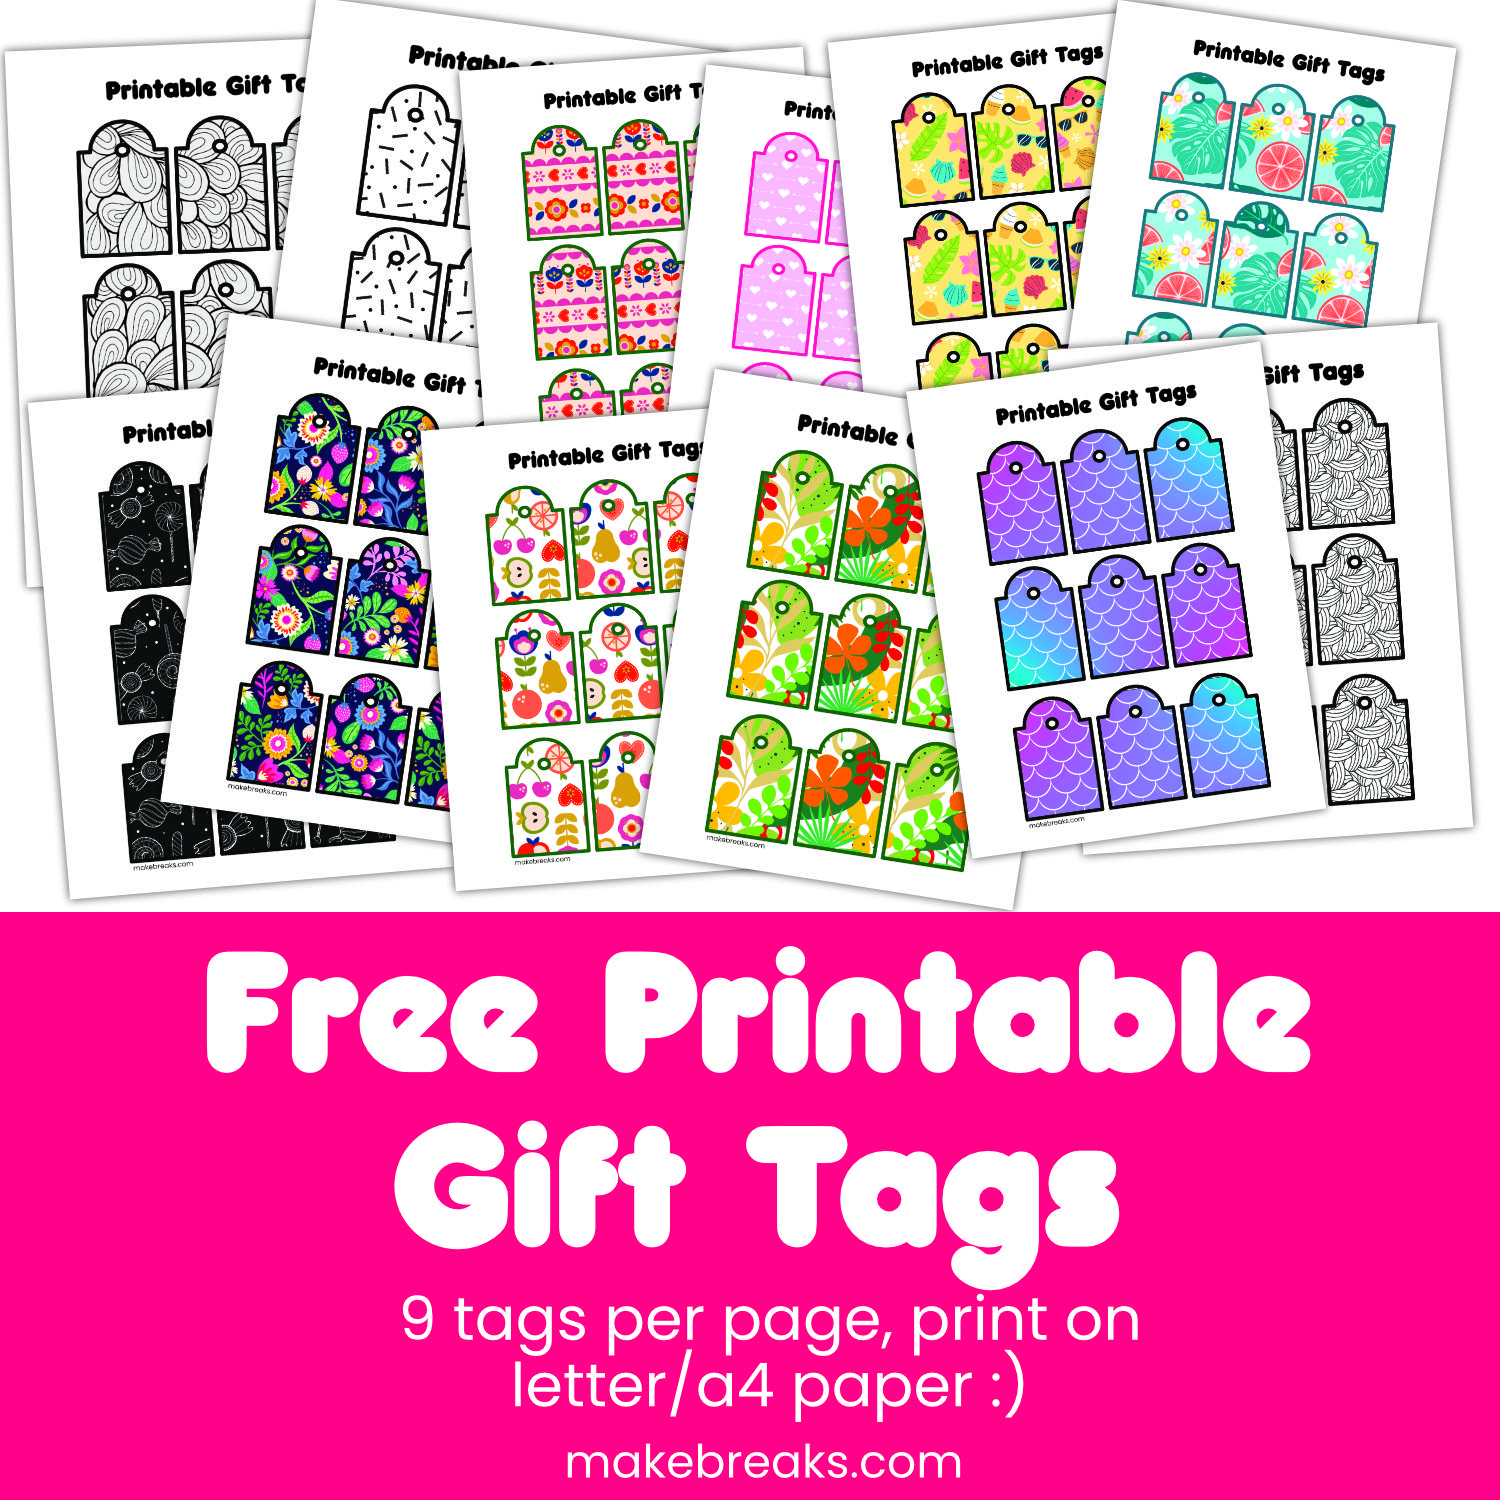 Free Printable Gift Tags for All Occasions